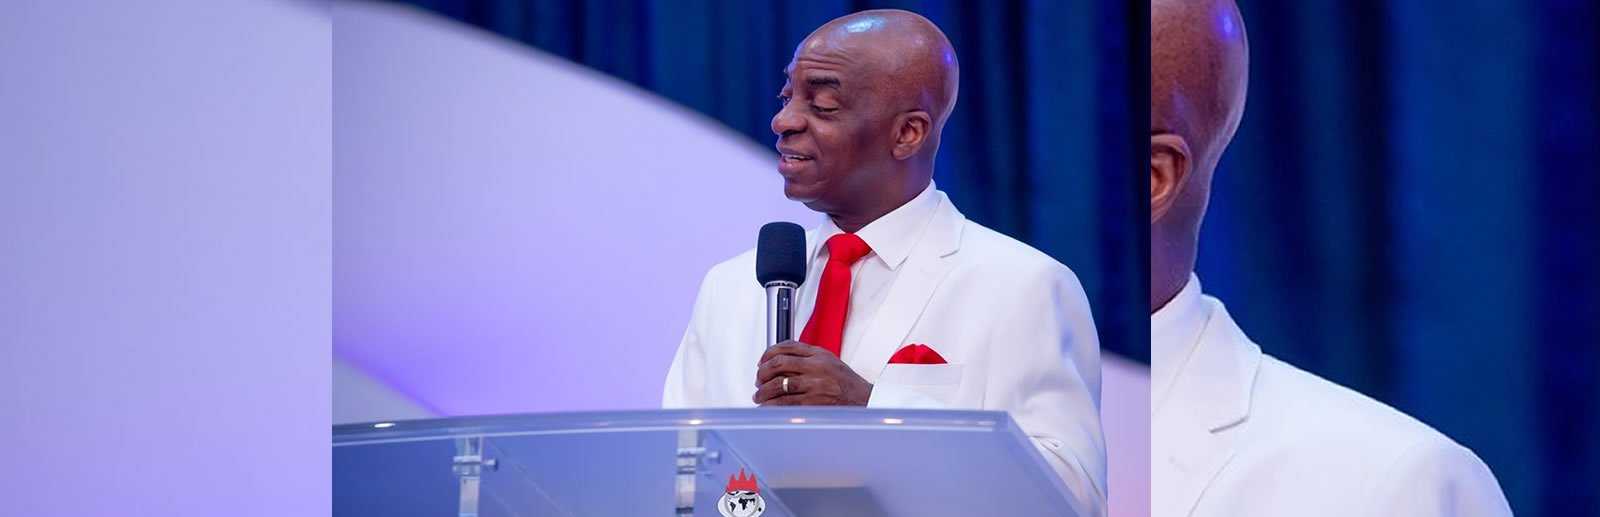 Bishop David Oyedepo, Holding a microphone